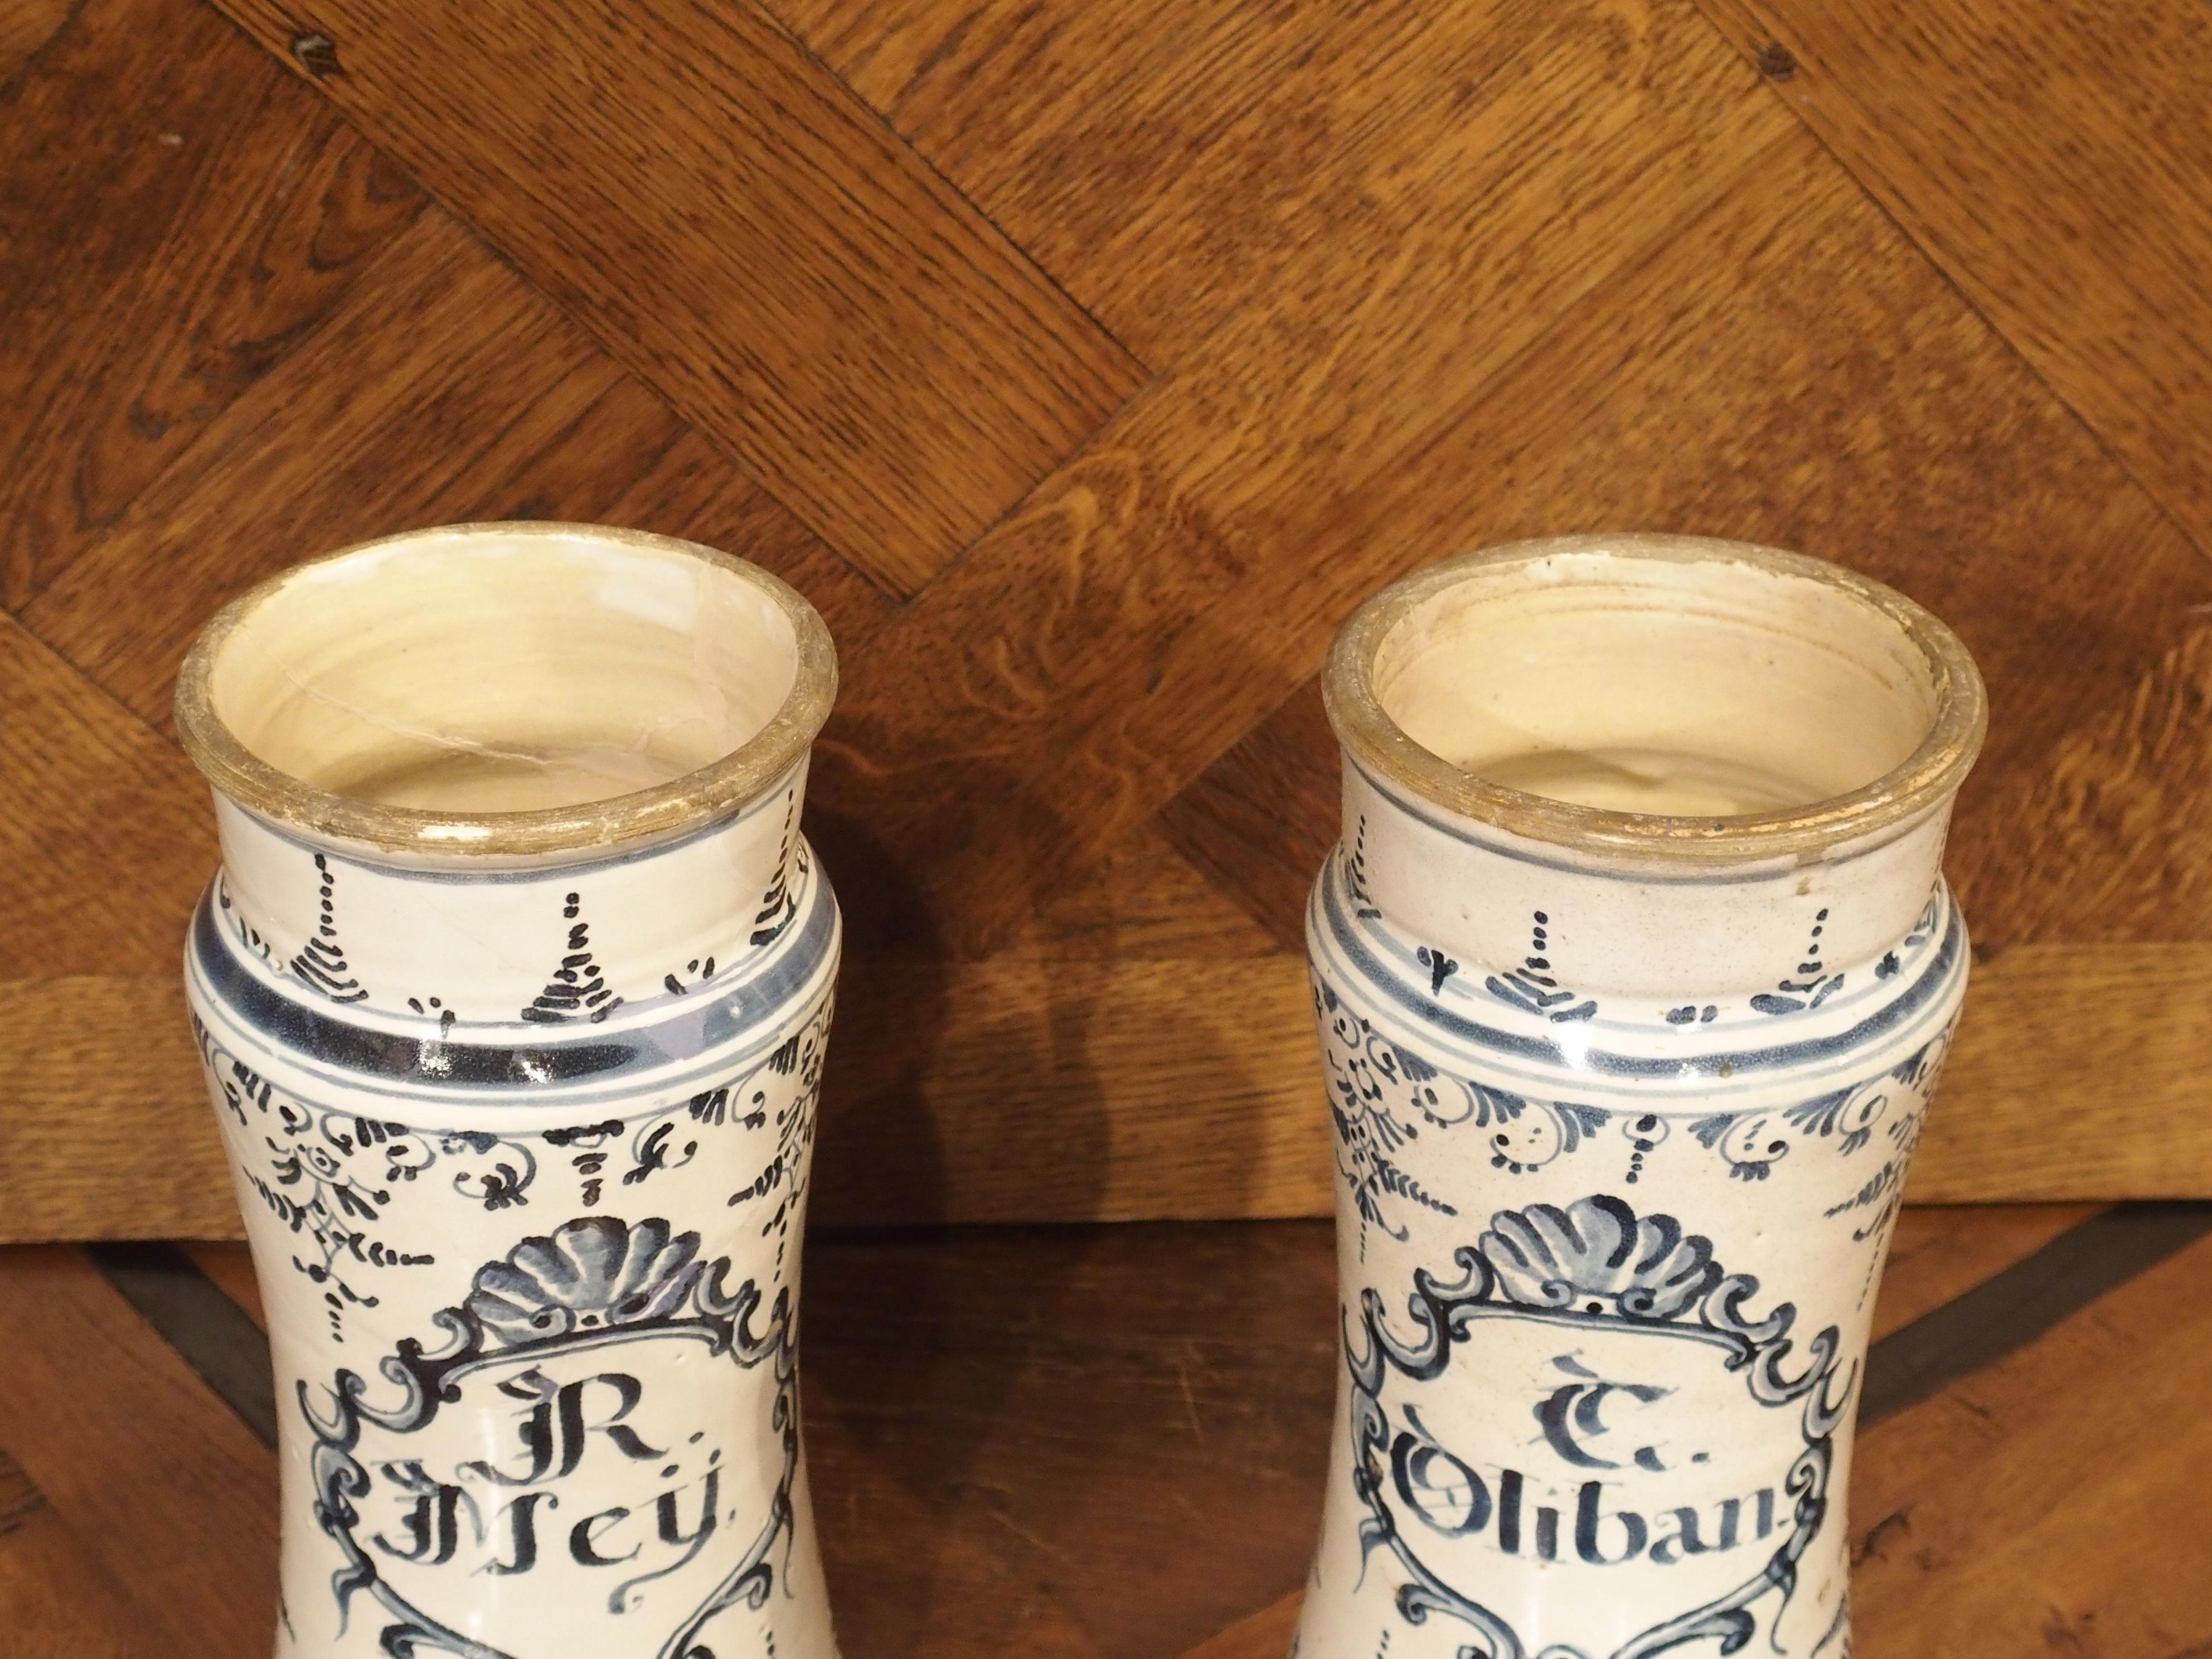 Originally used as medicinal pottery jars that held ointments and dry drugs at apothecaries, these 18th century Spanish albarelli are now used as decorative accessories and are highly sought after by collectors.

The oldest Albarelli were always